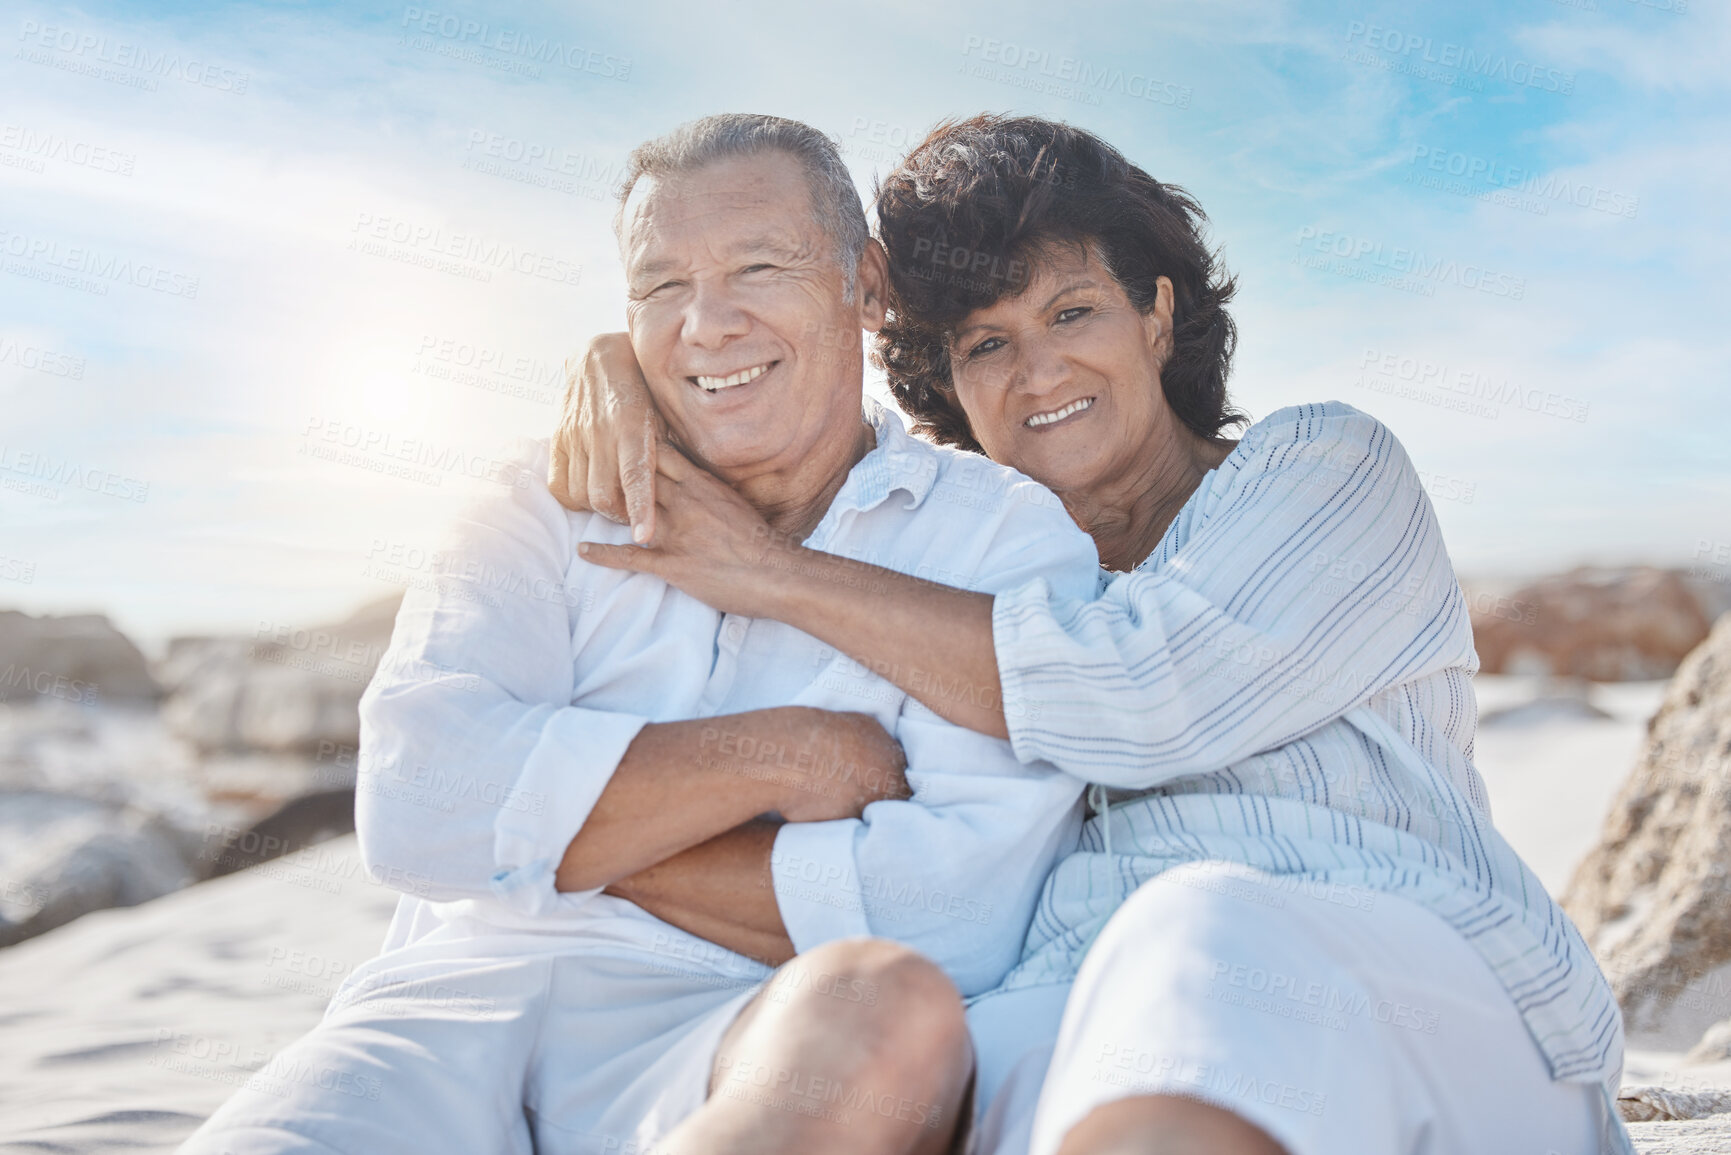 Buy stock photo Portrait of a senior mixed race couple sitting together on the beach embracing one another and smiling on a day out at the beach. Hispanic husband and wife looking happy and showing affection while having a romantic day on the beach